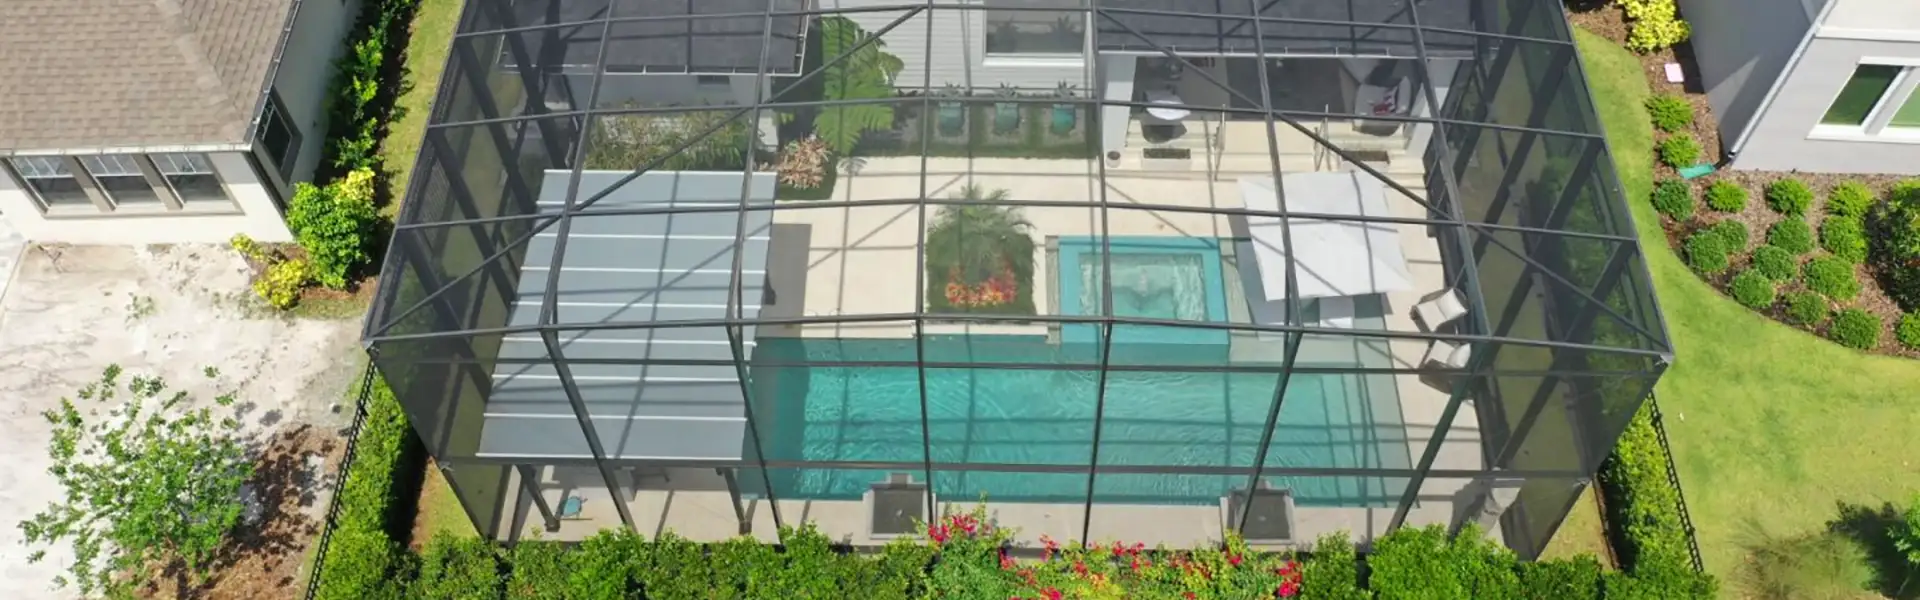 How to Build a Pool Enclosure